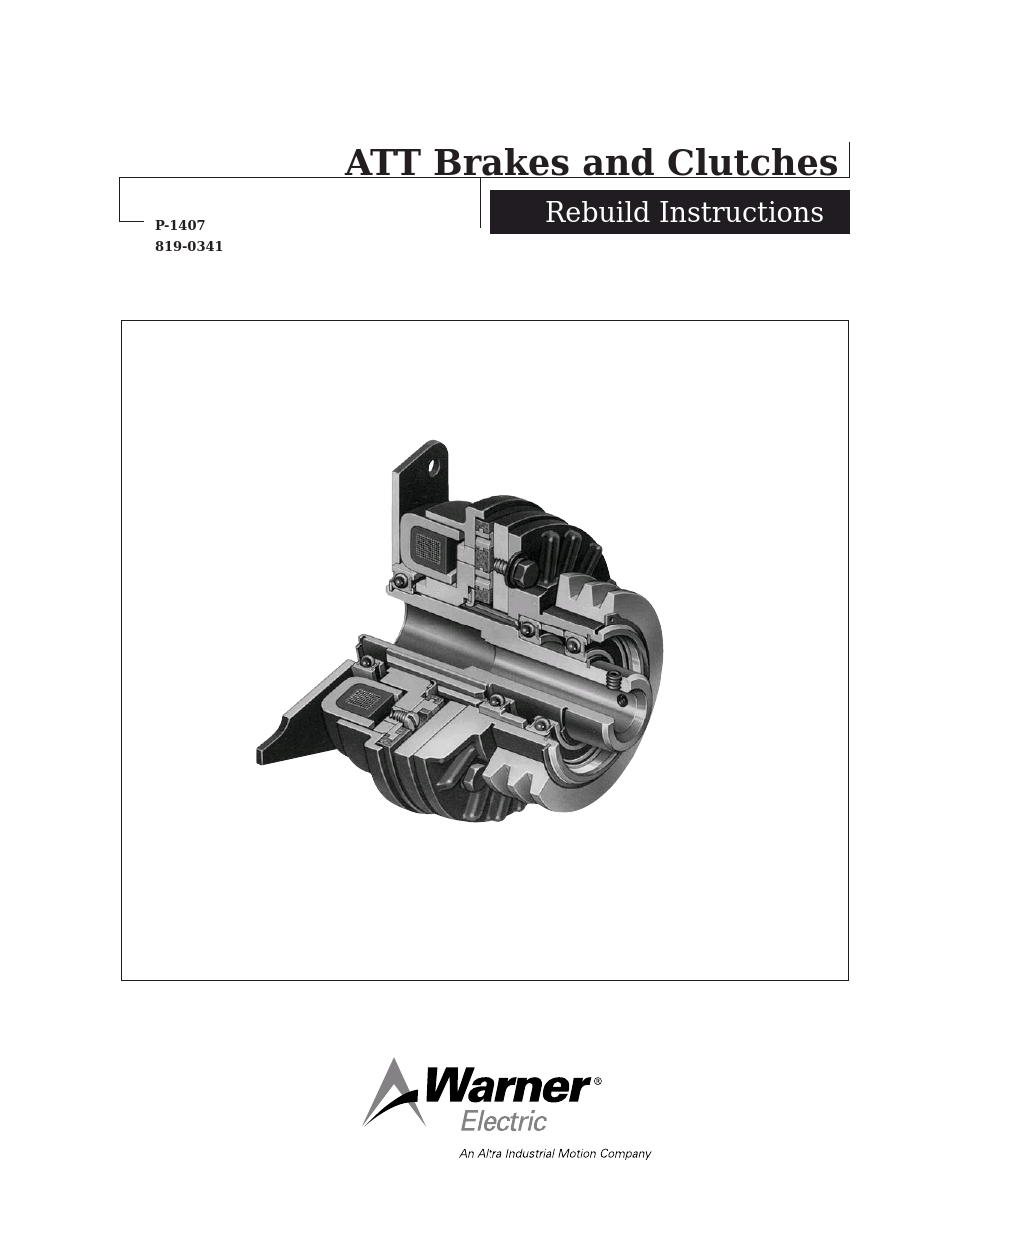 ATT Brakes and Clutches